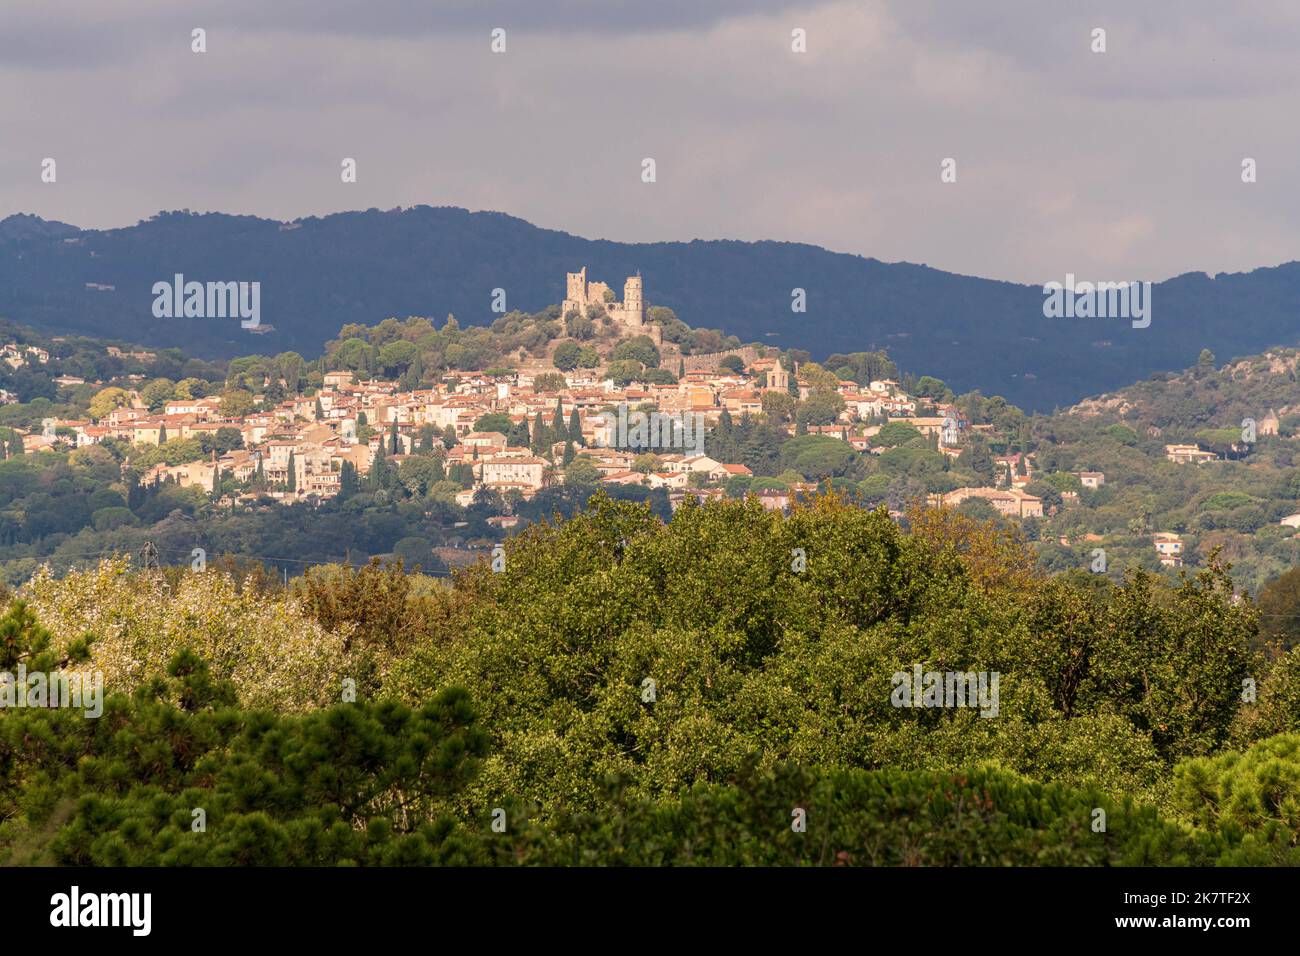 The Town of Grimaud and its ruined castle in the Var department of the Provence-Alpes-Côte d'Azur region in Southern France. Stock Photo